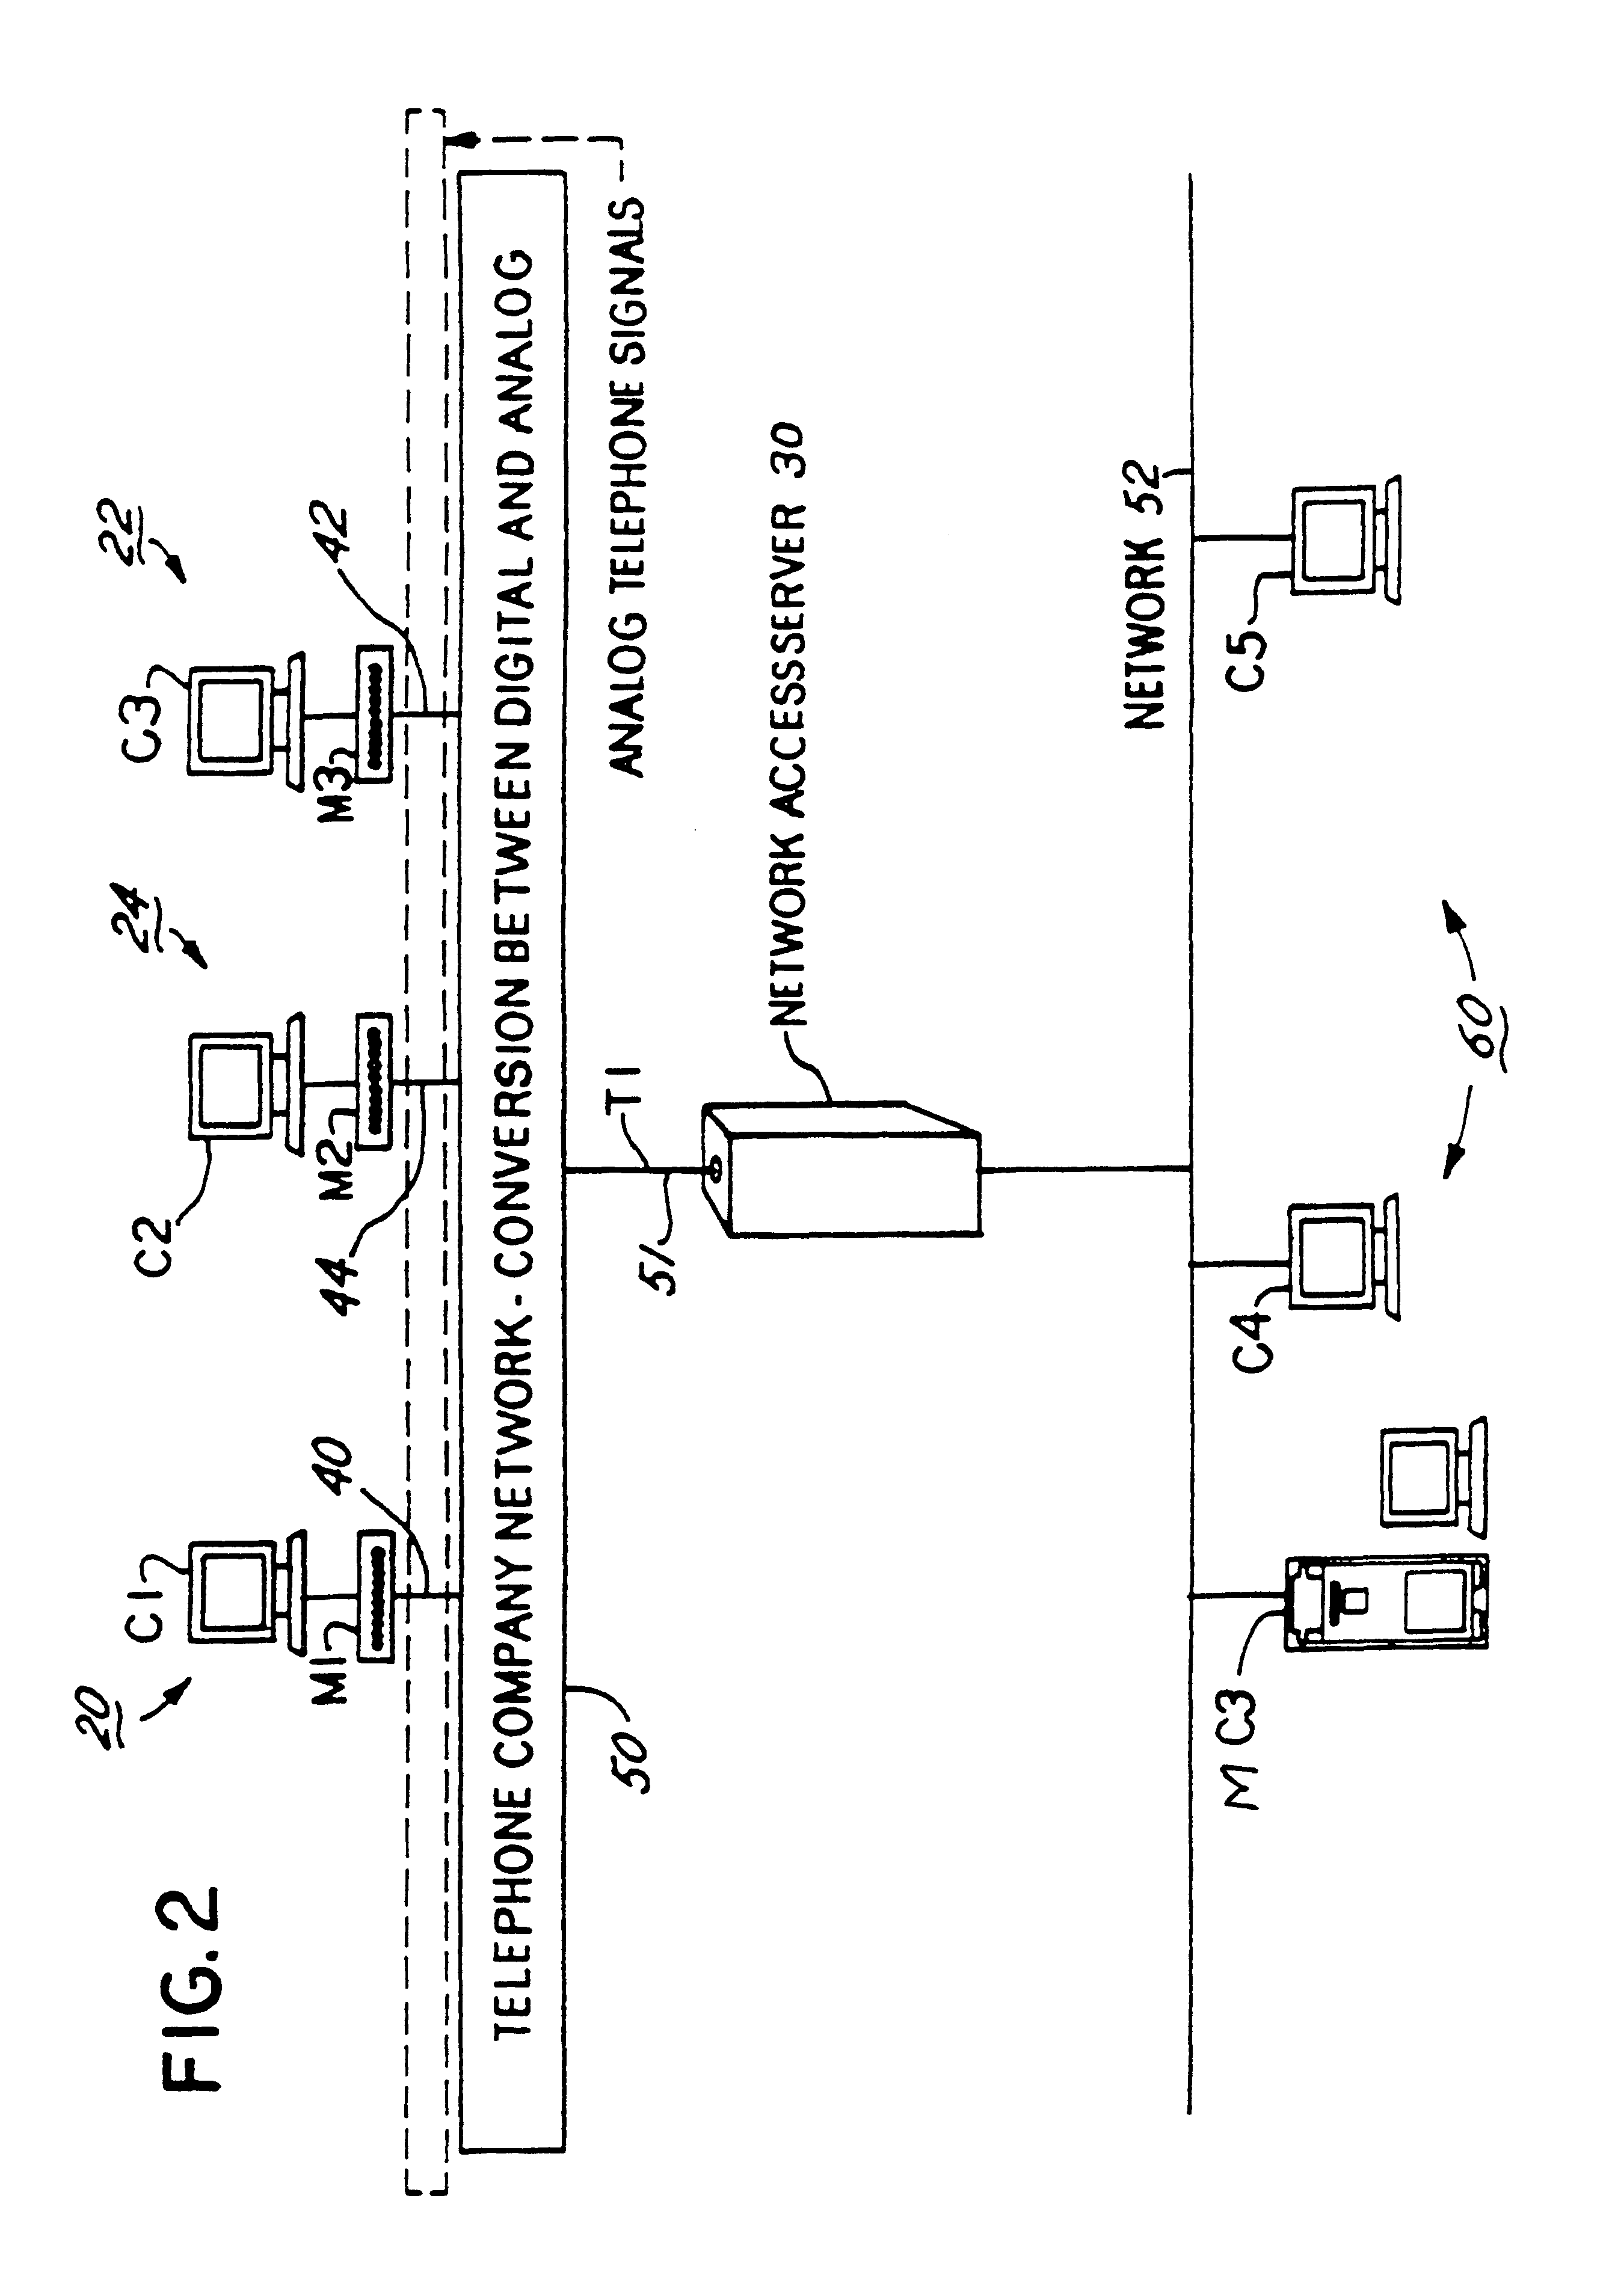 Distributed processing of high level protocols, in a network access server